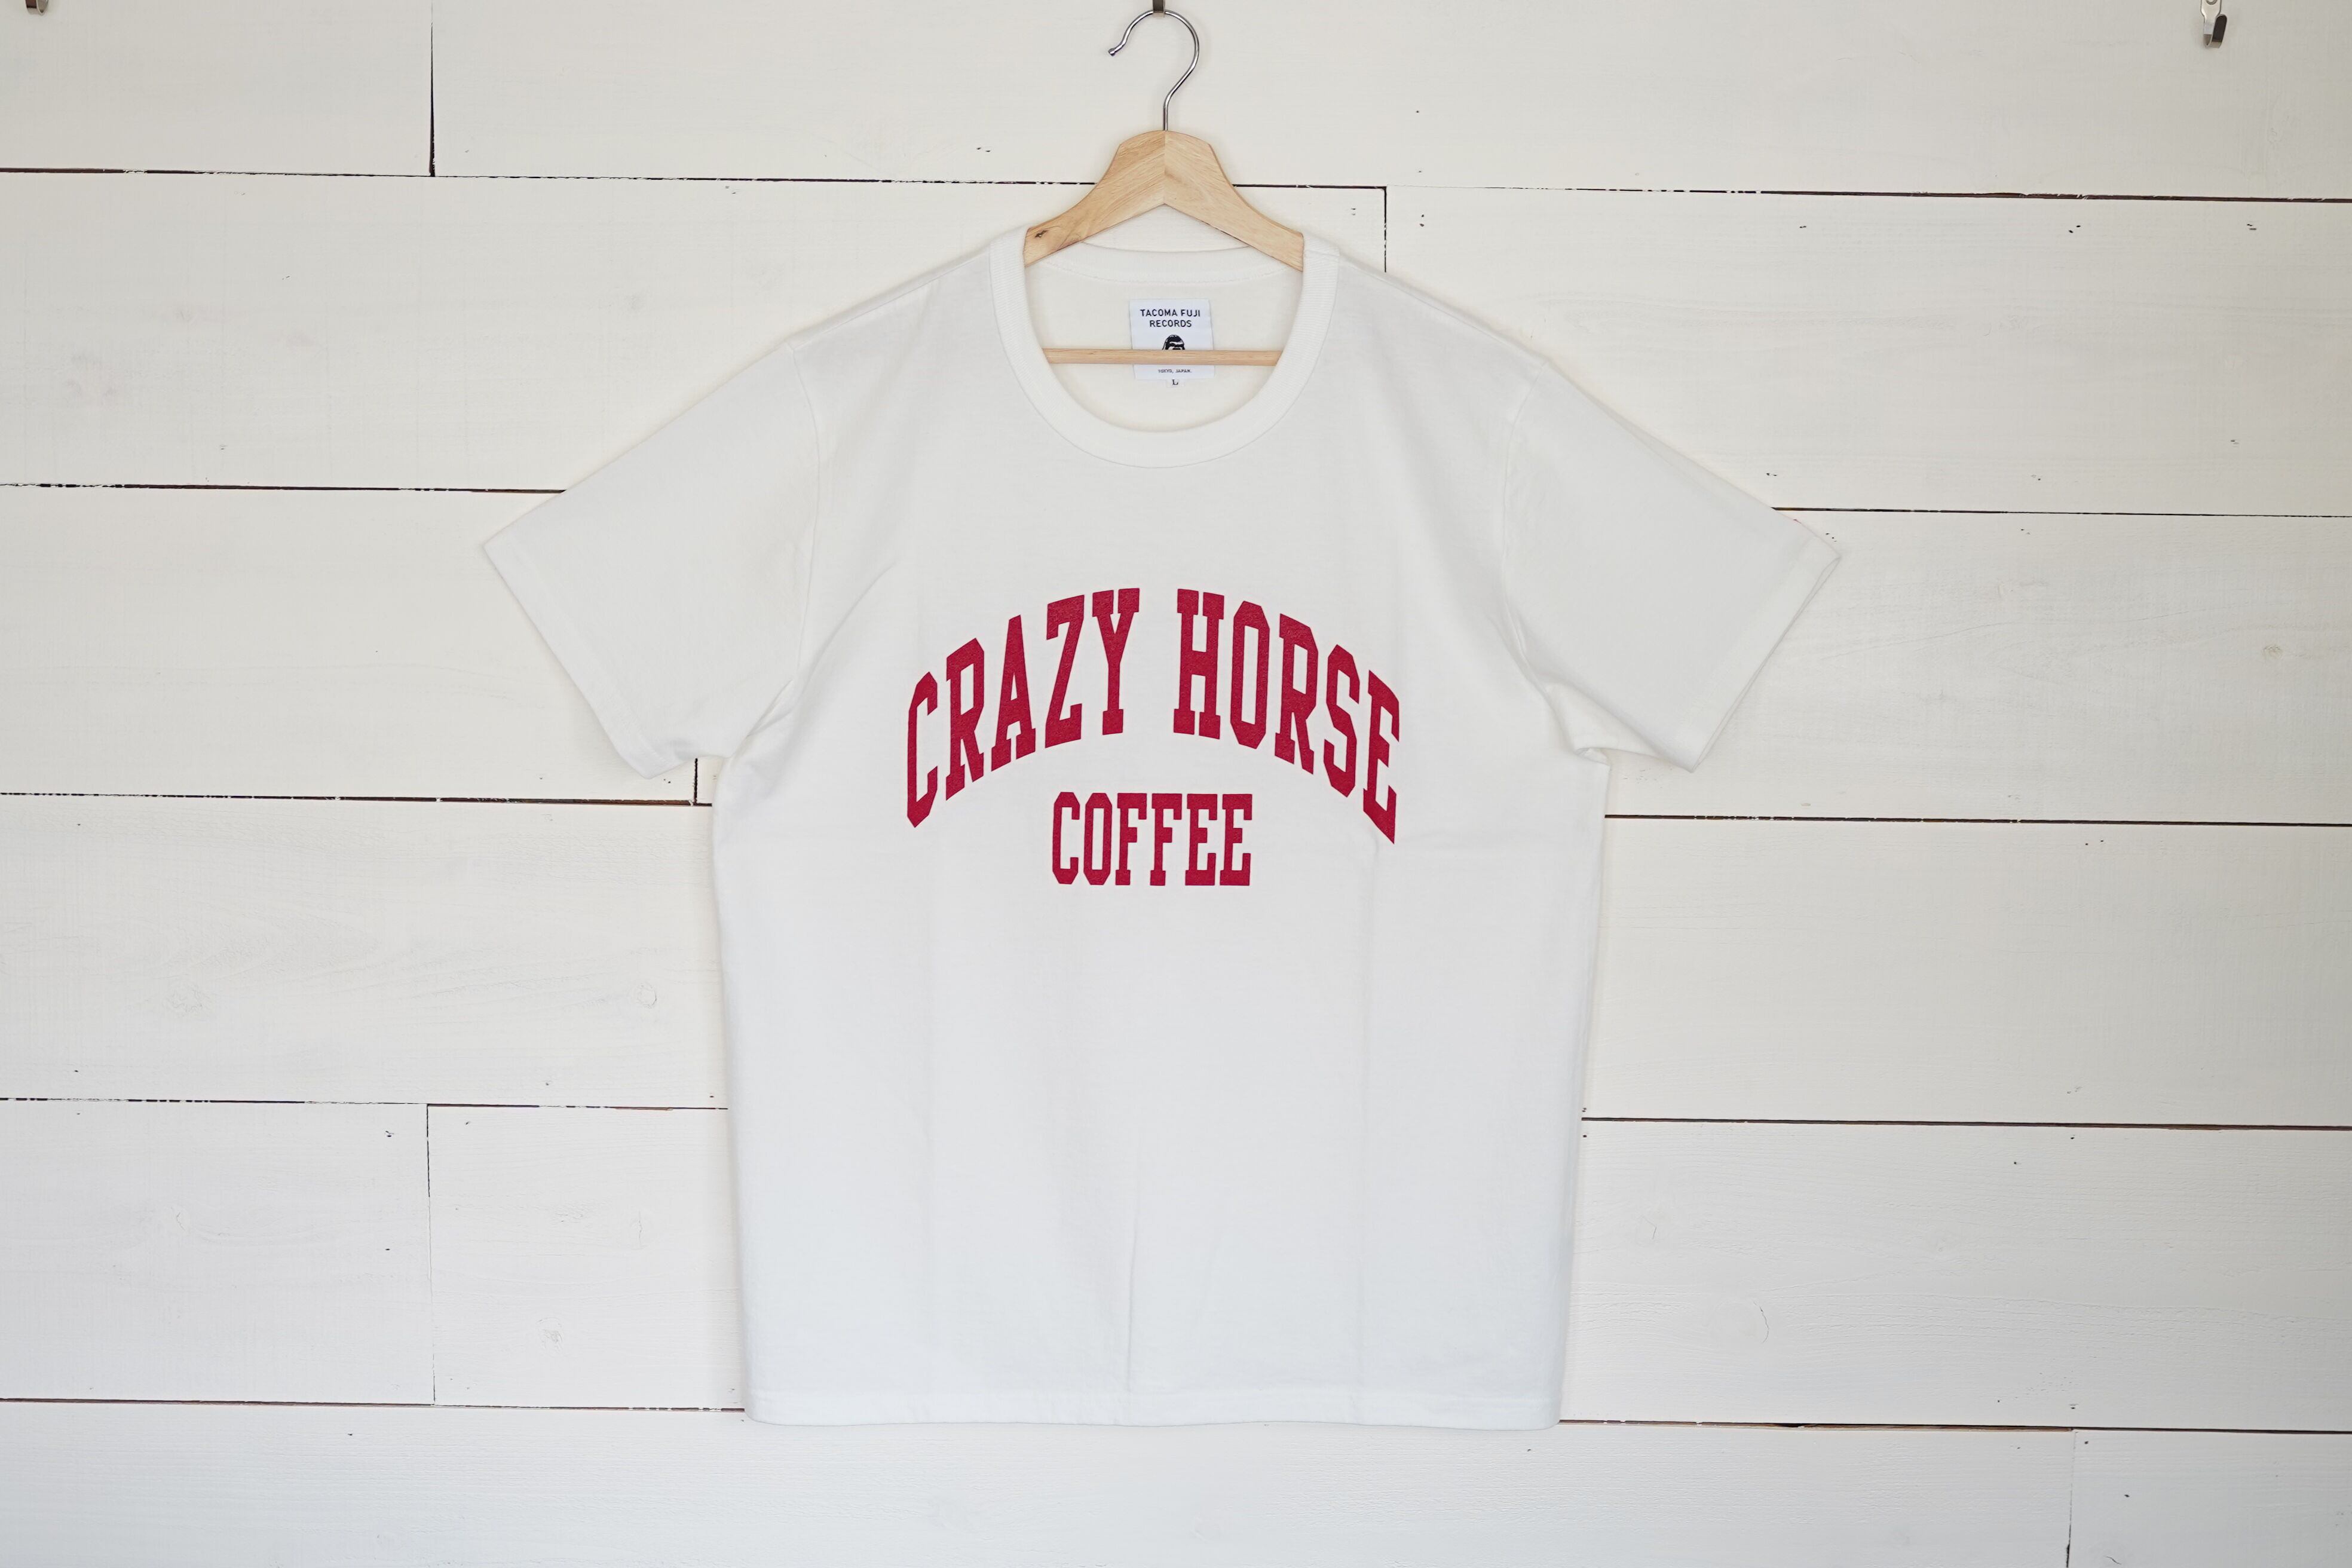 CRAZY HORSE COFFEE TEE by Tacoma Fuji (designed by ...